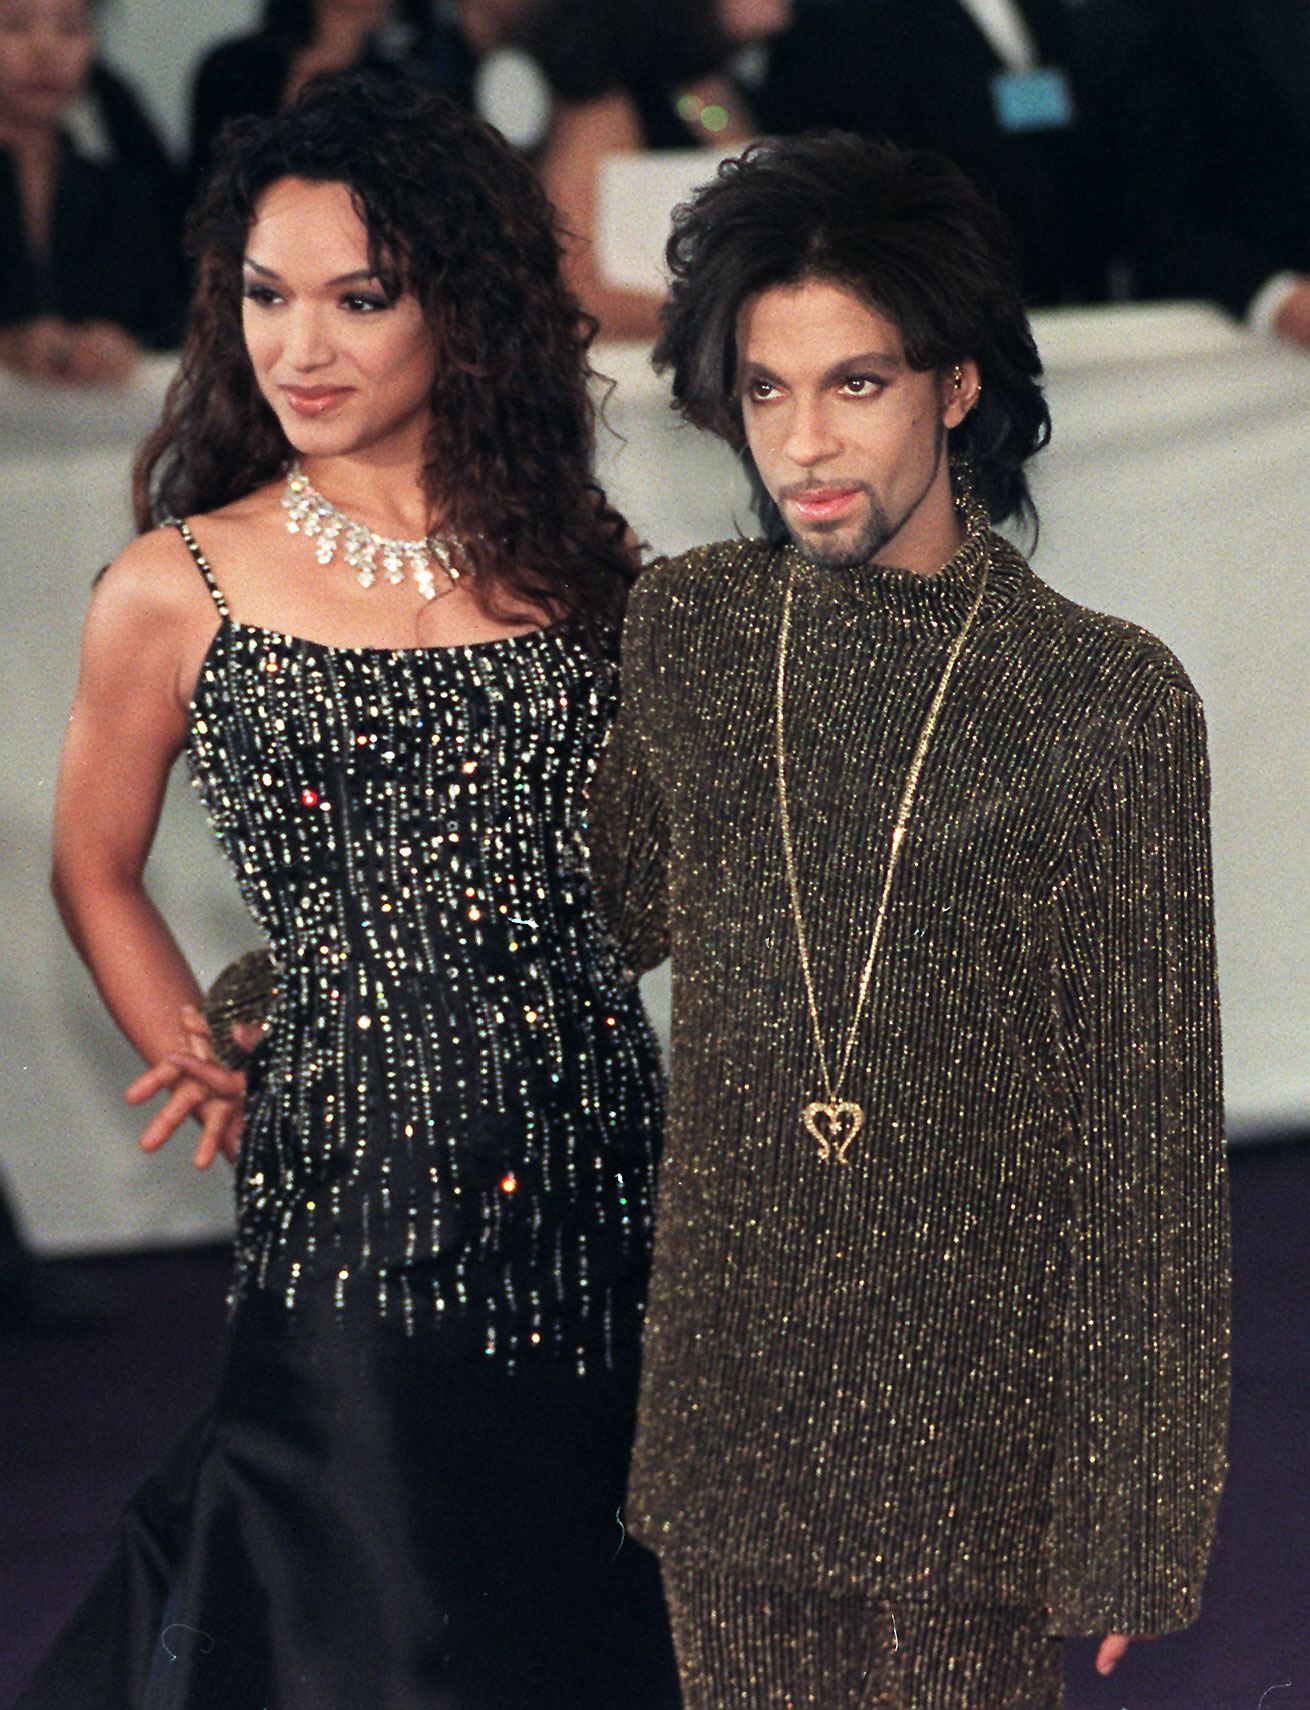 Prince and Mayte Garcia during the De Beer and Versace "Diamonds are forever" charity fashion event 09 June 1999. | Source: Getty Images